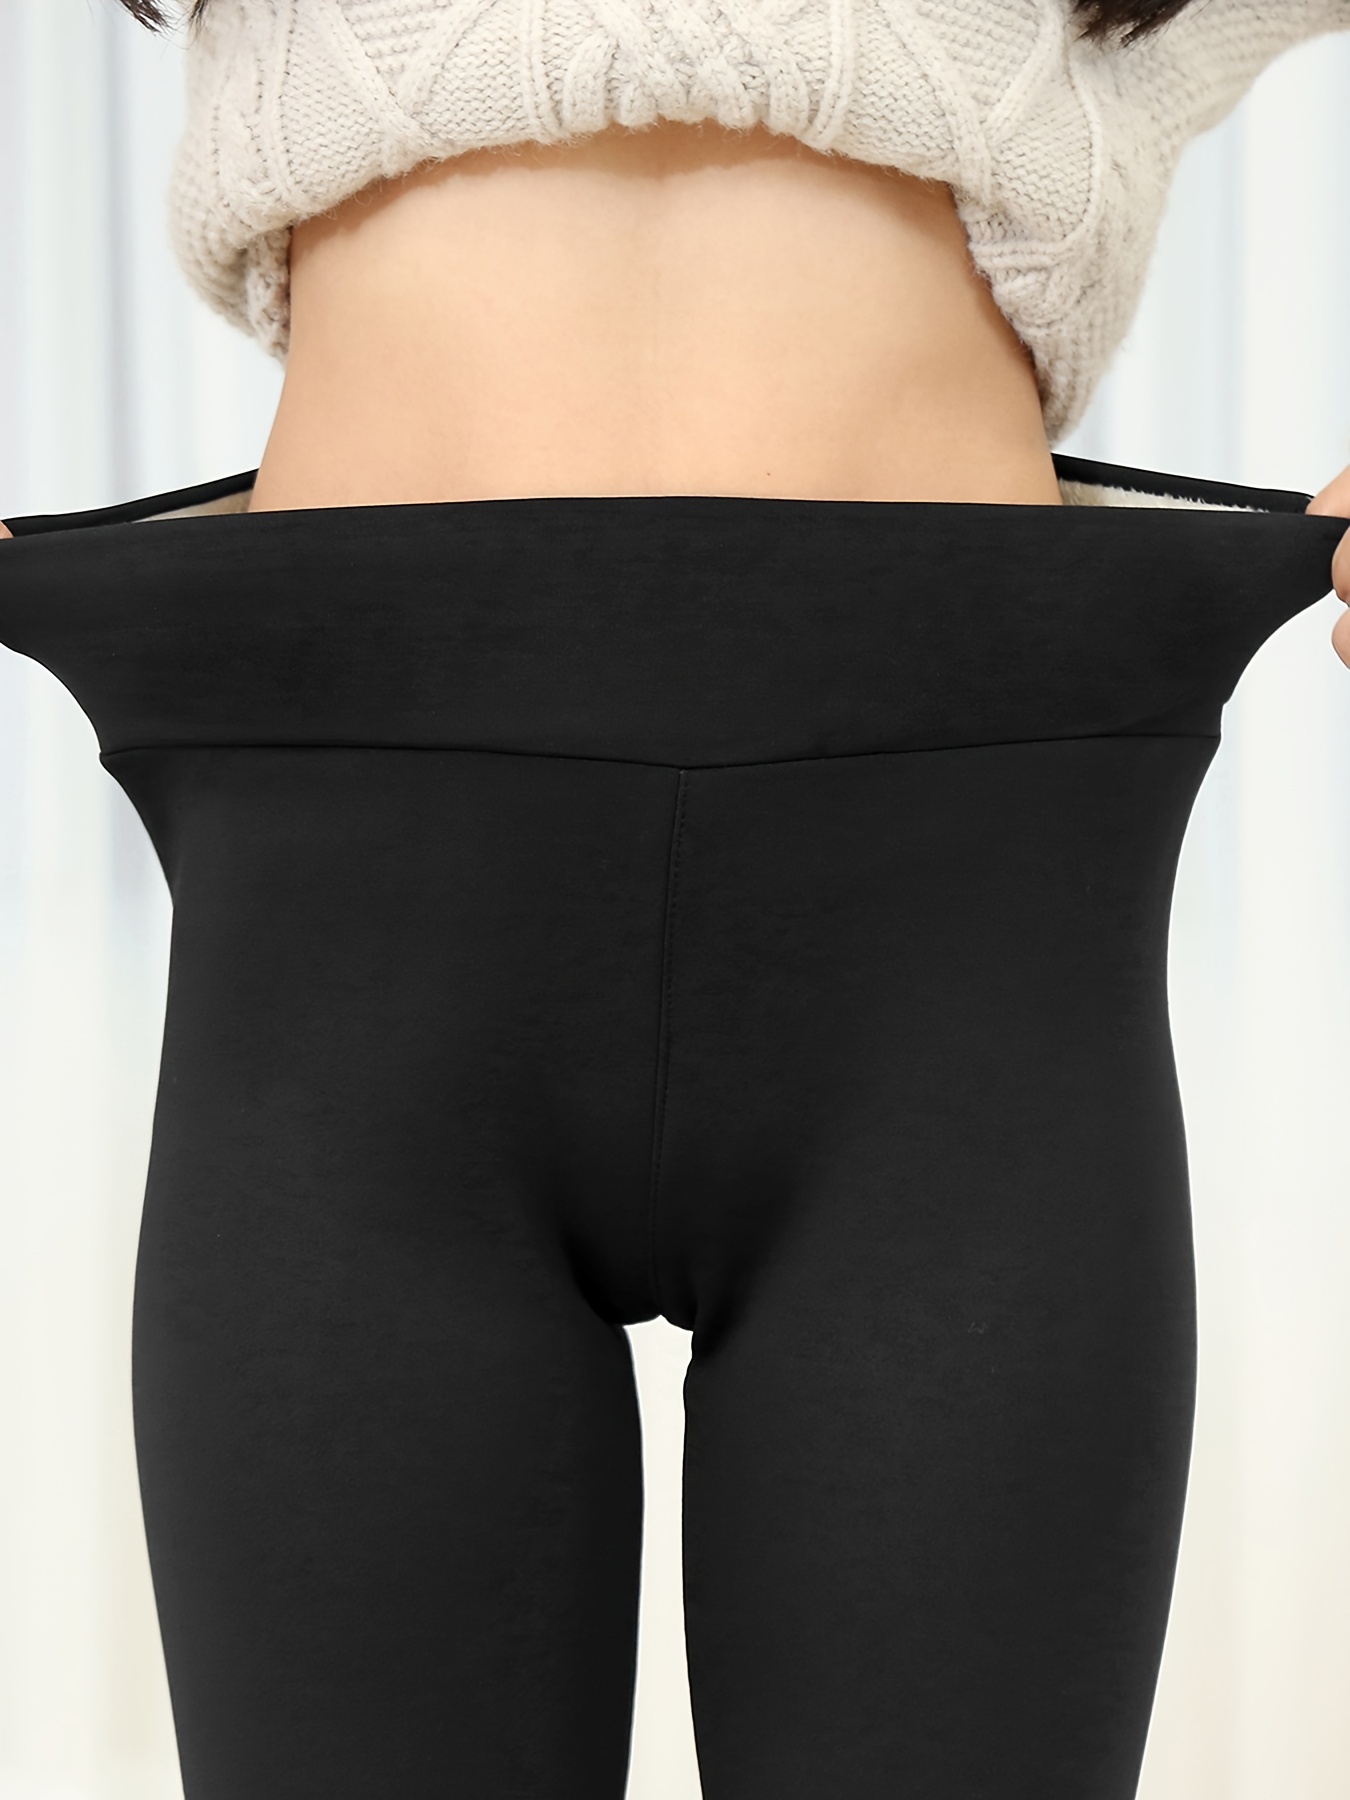 Thermal Leggings for Women, Shop Mid-rise & High-waisted